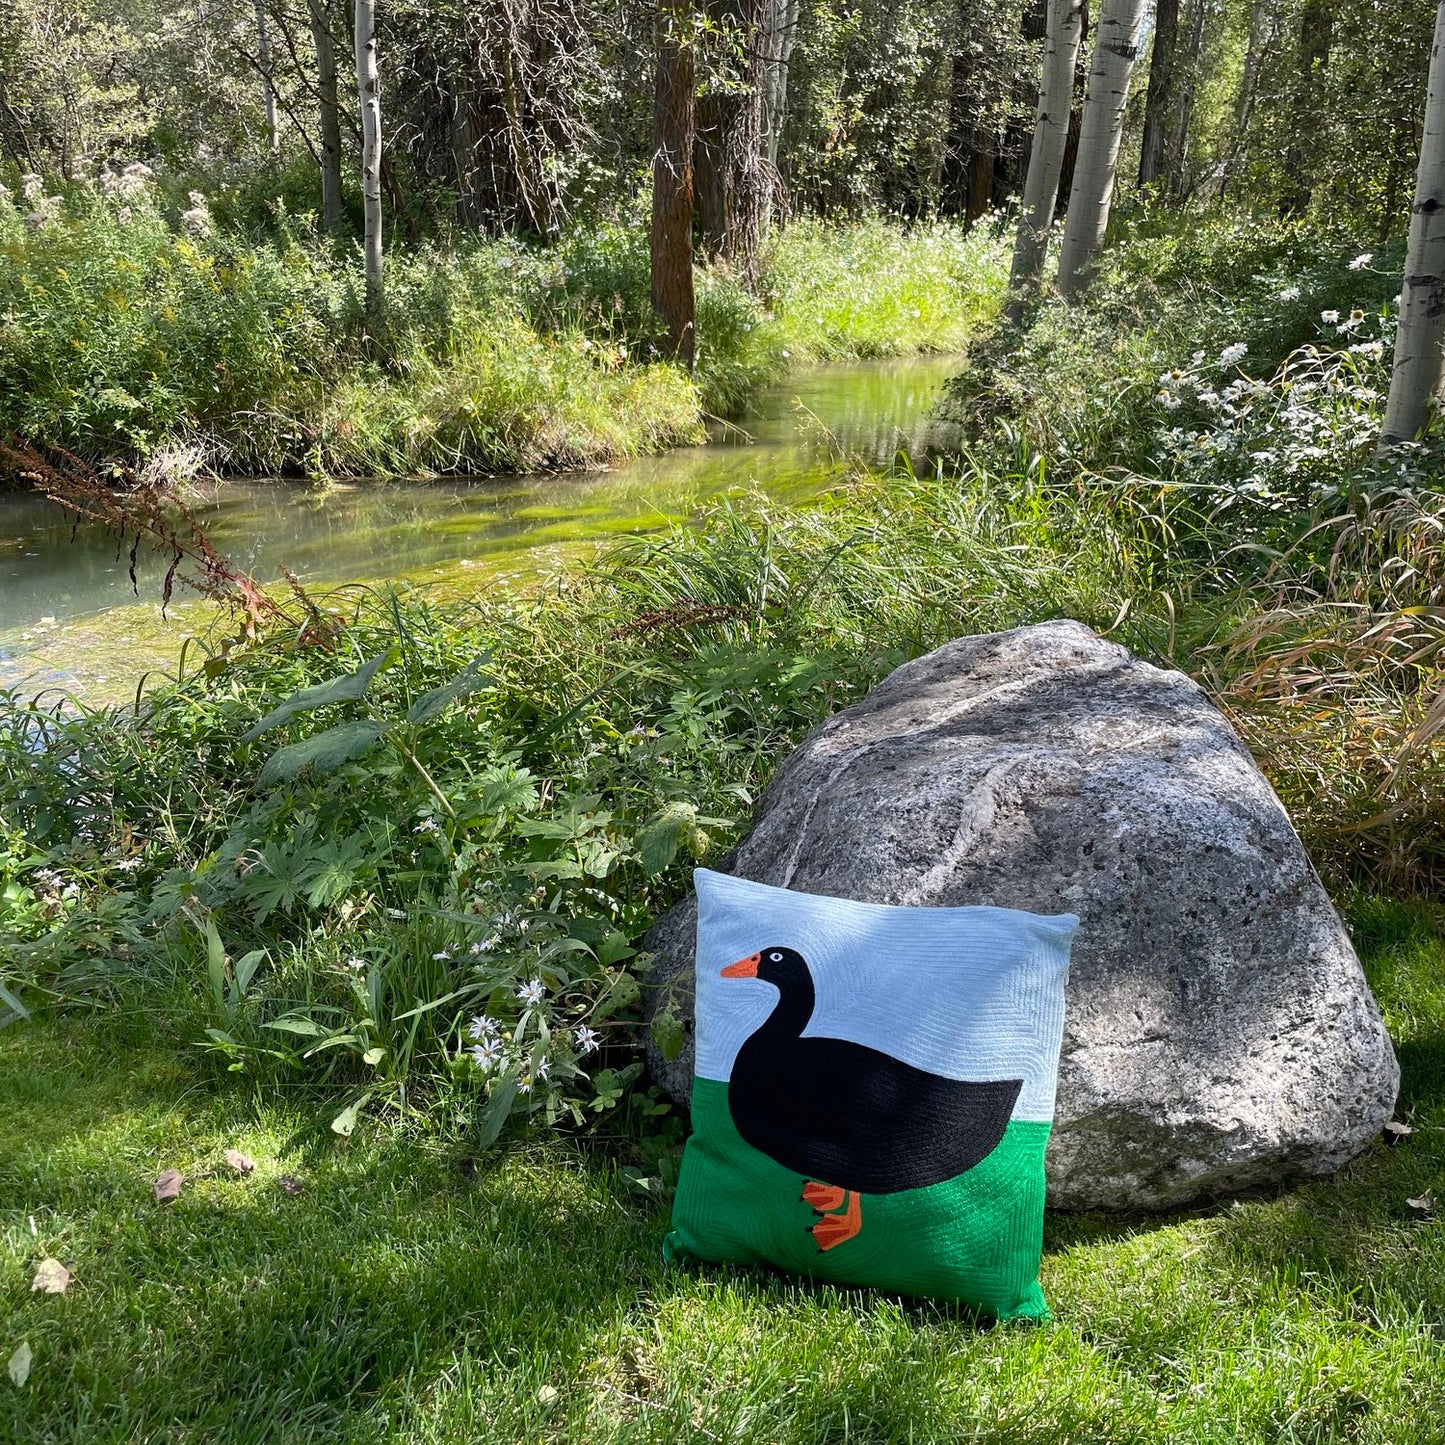 Black Duck at the Park Cushion Cover